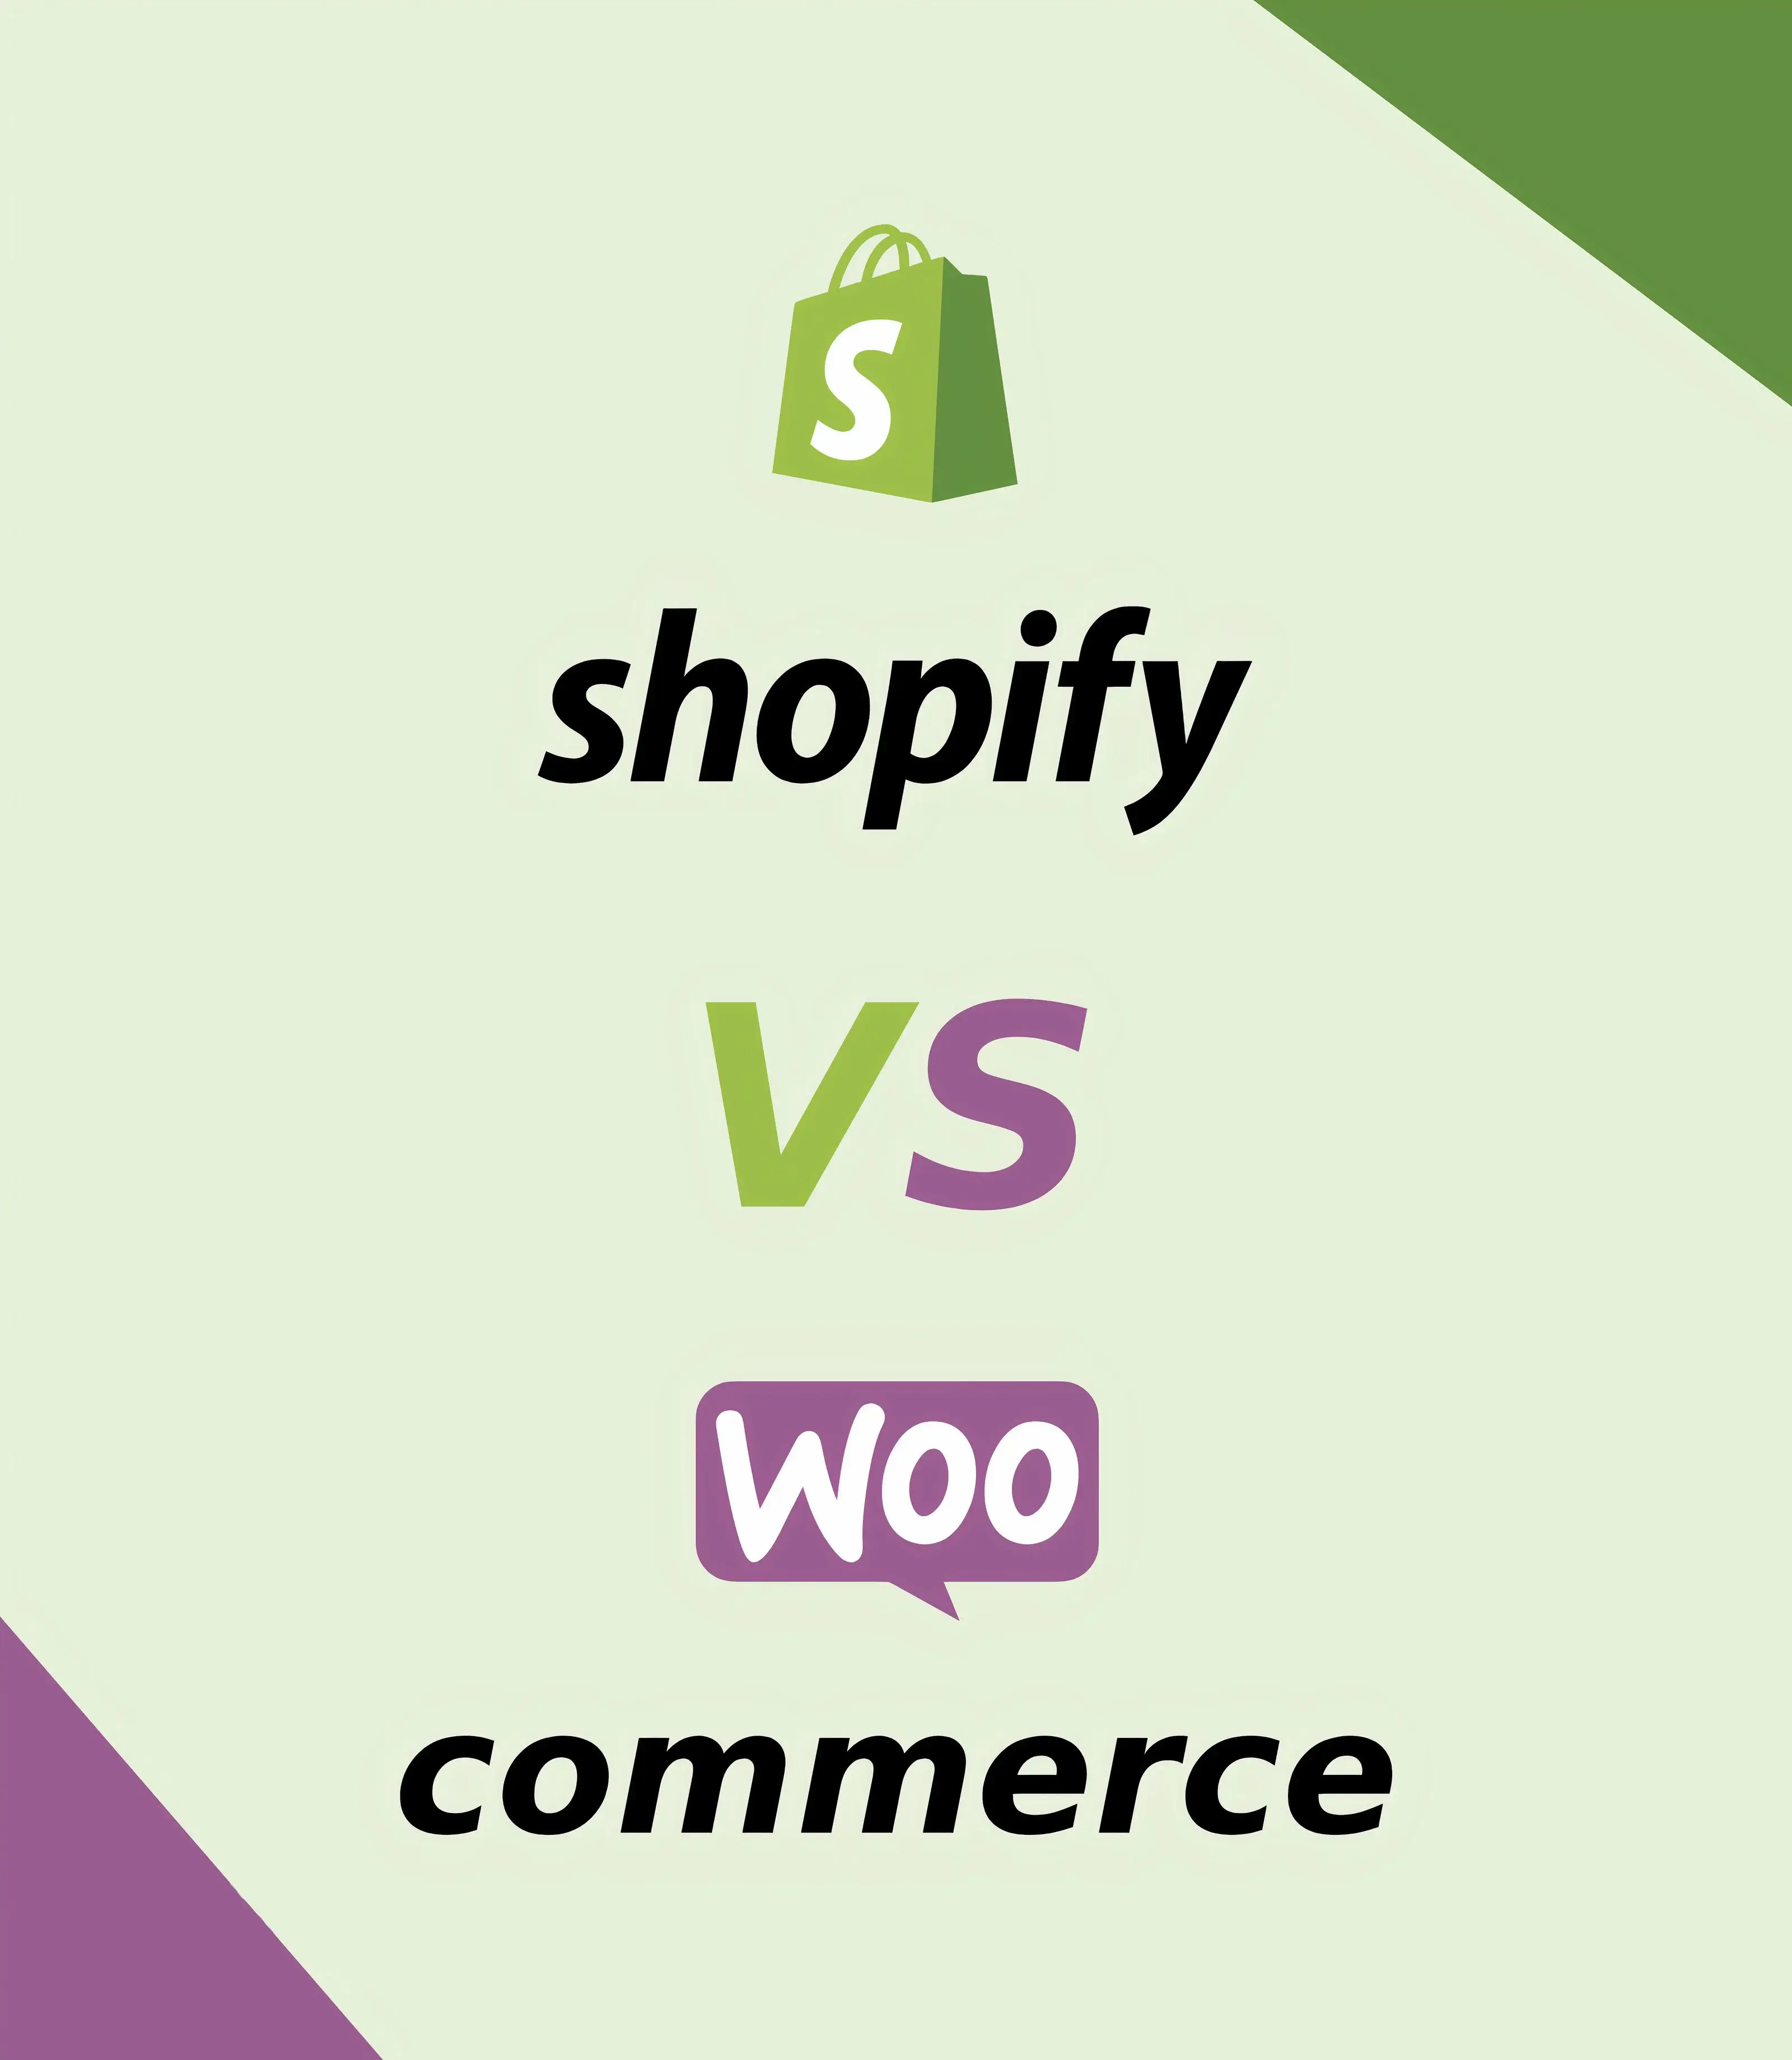 Top Benefits of Using Shopify for Small Businesses